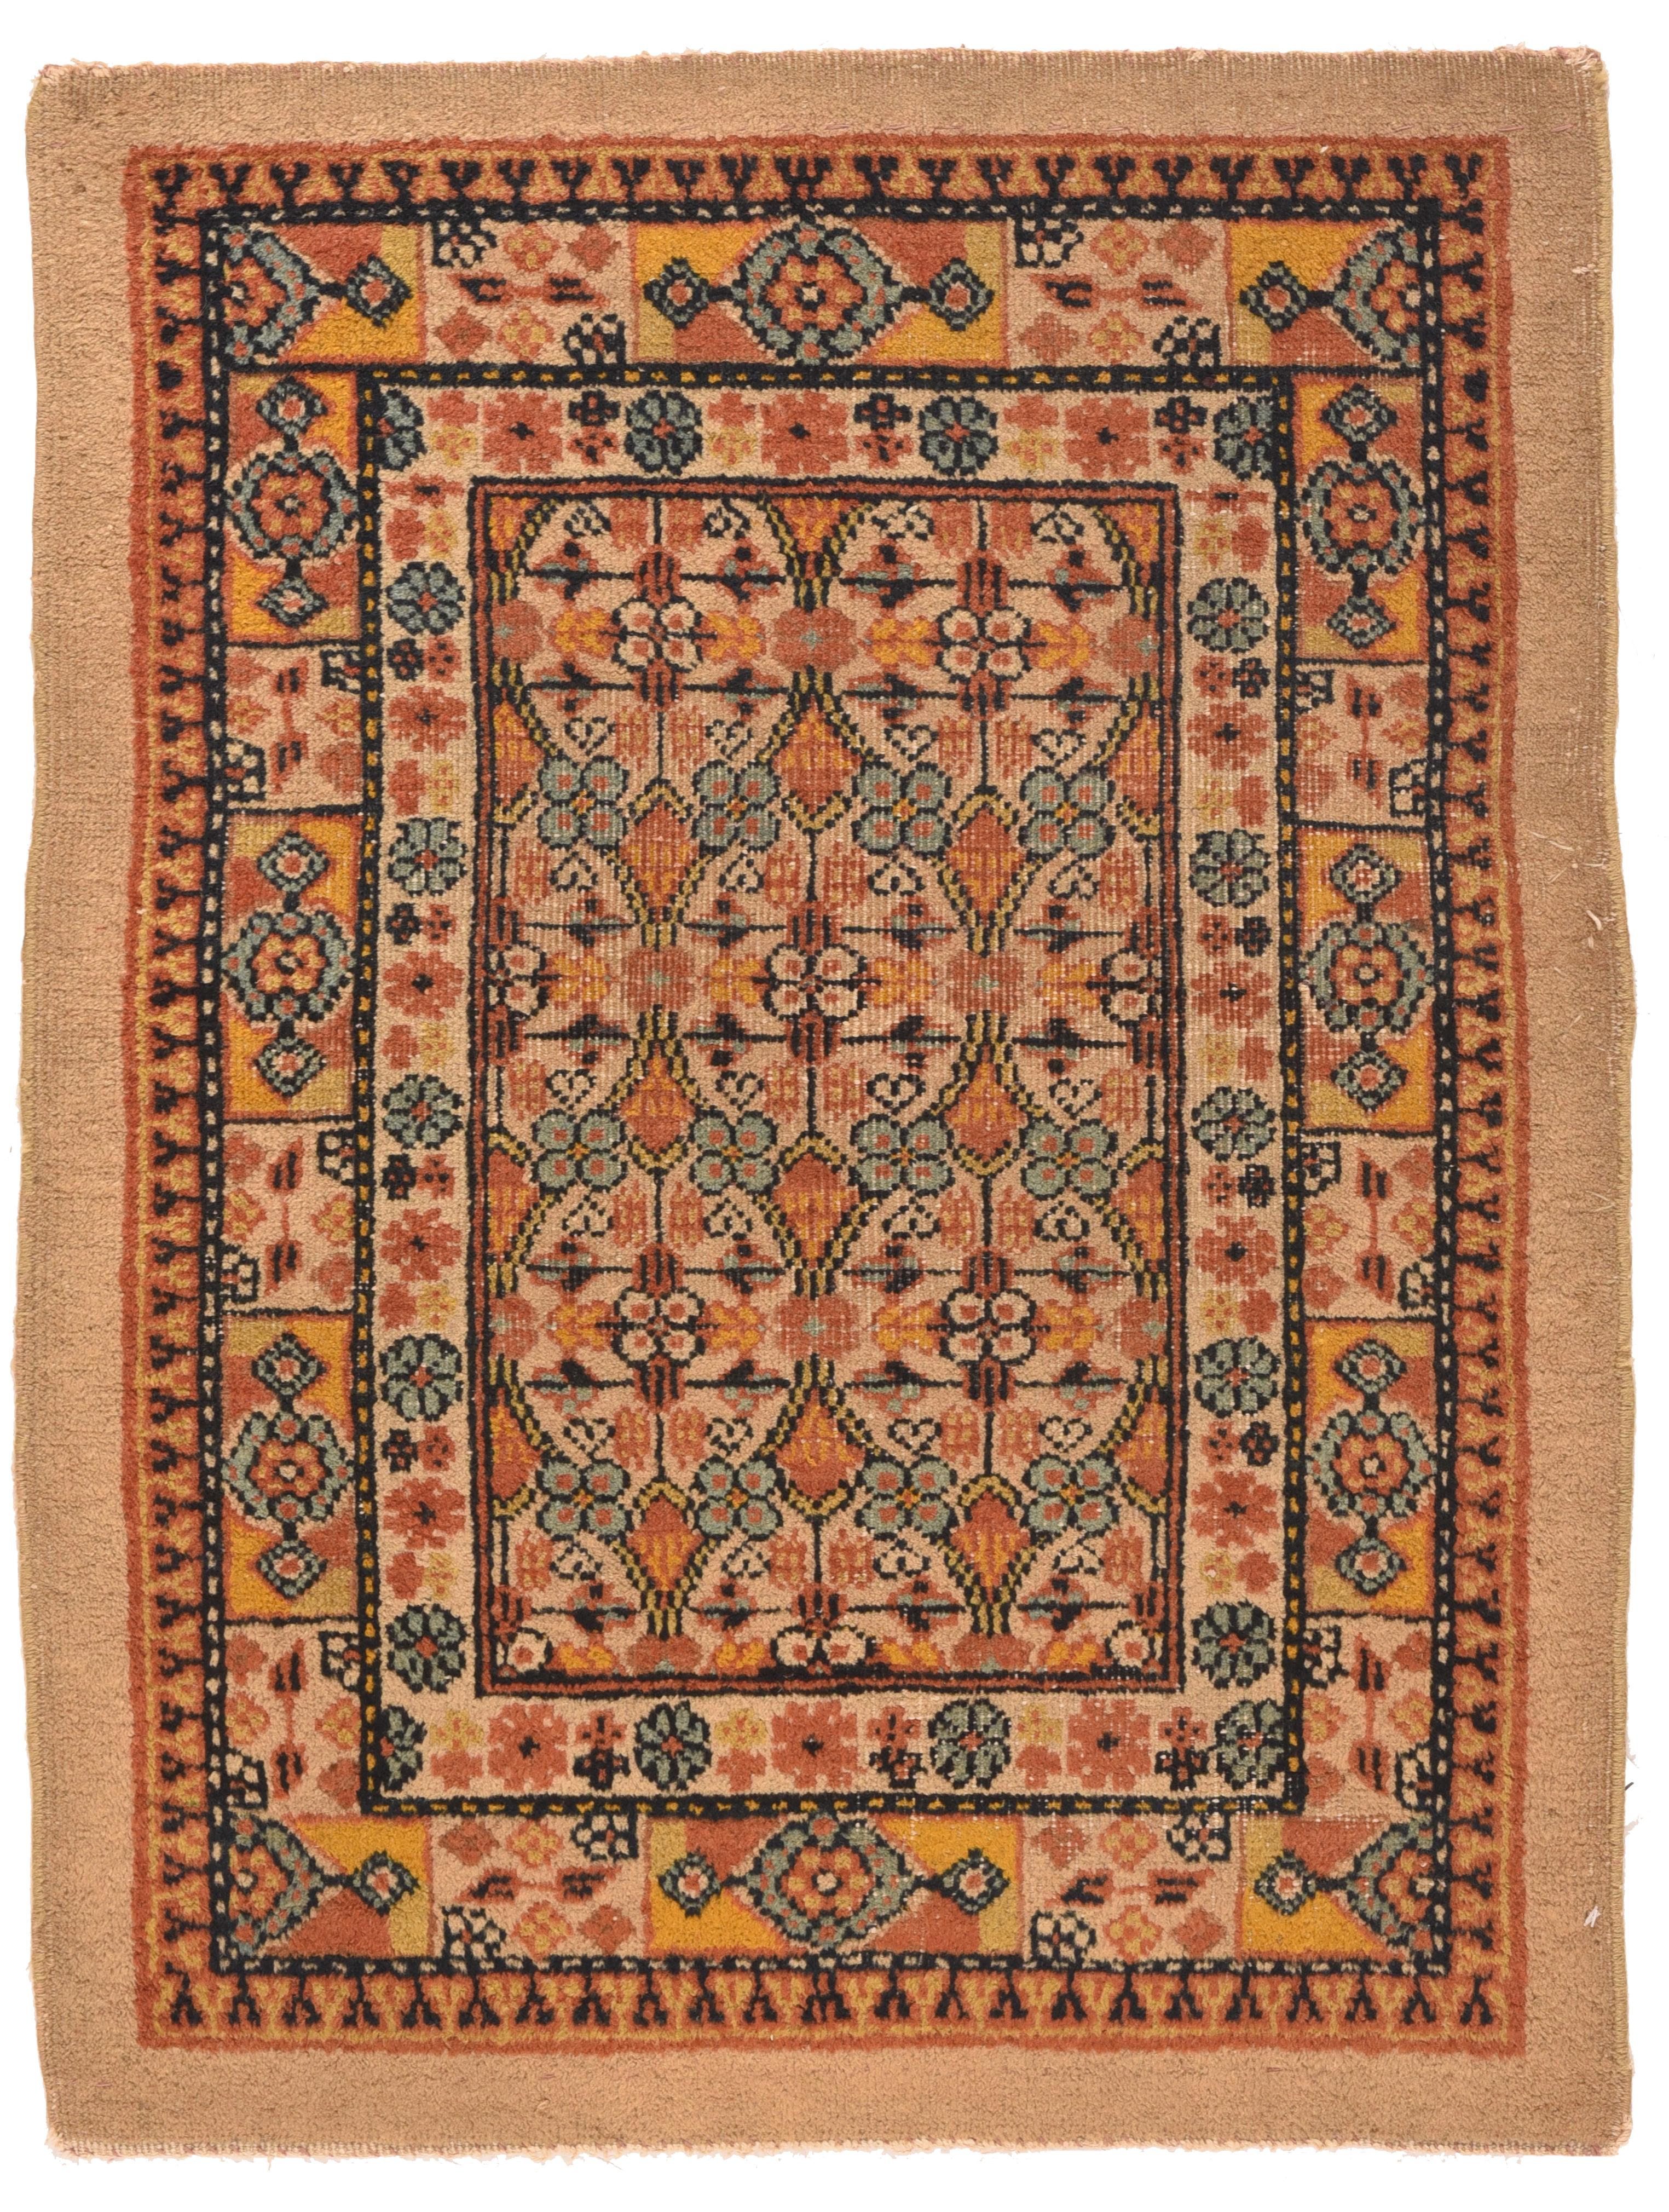 Early 20th Century Antique Bakhshaish Rug For Sale